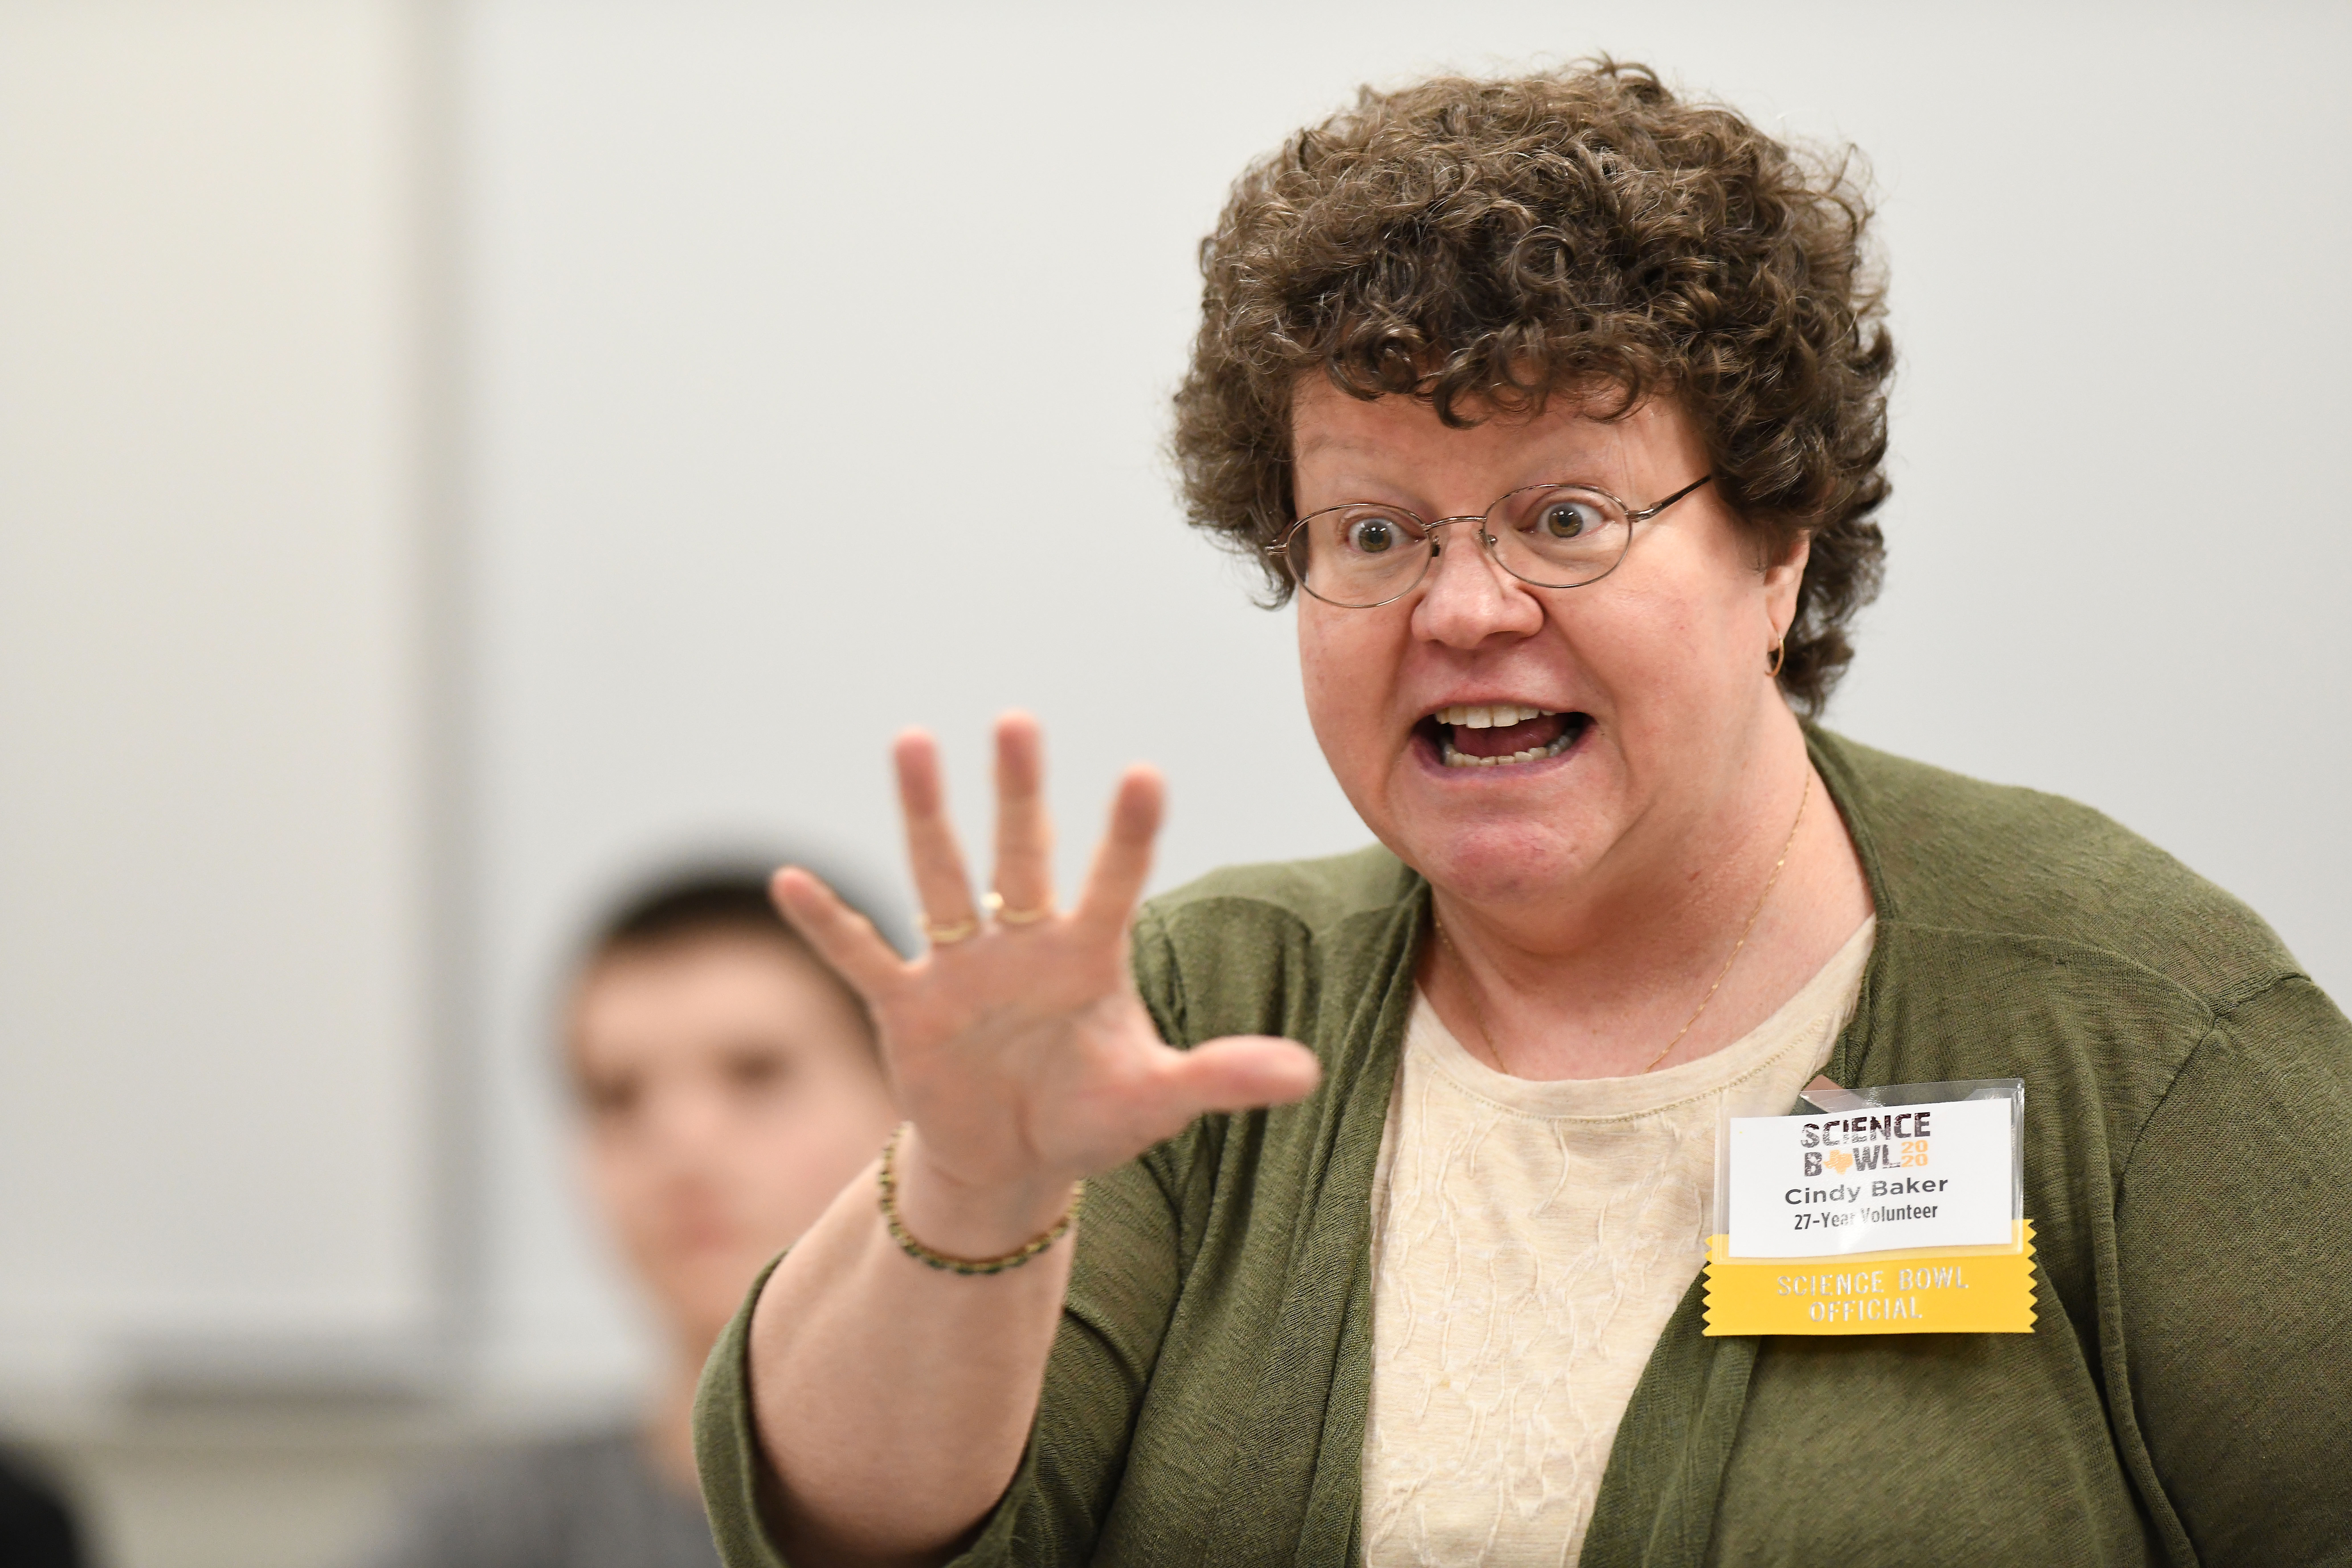 Cindy Baker has been volunteering for the National Science Bowl for more than 25 years.